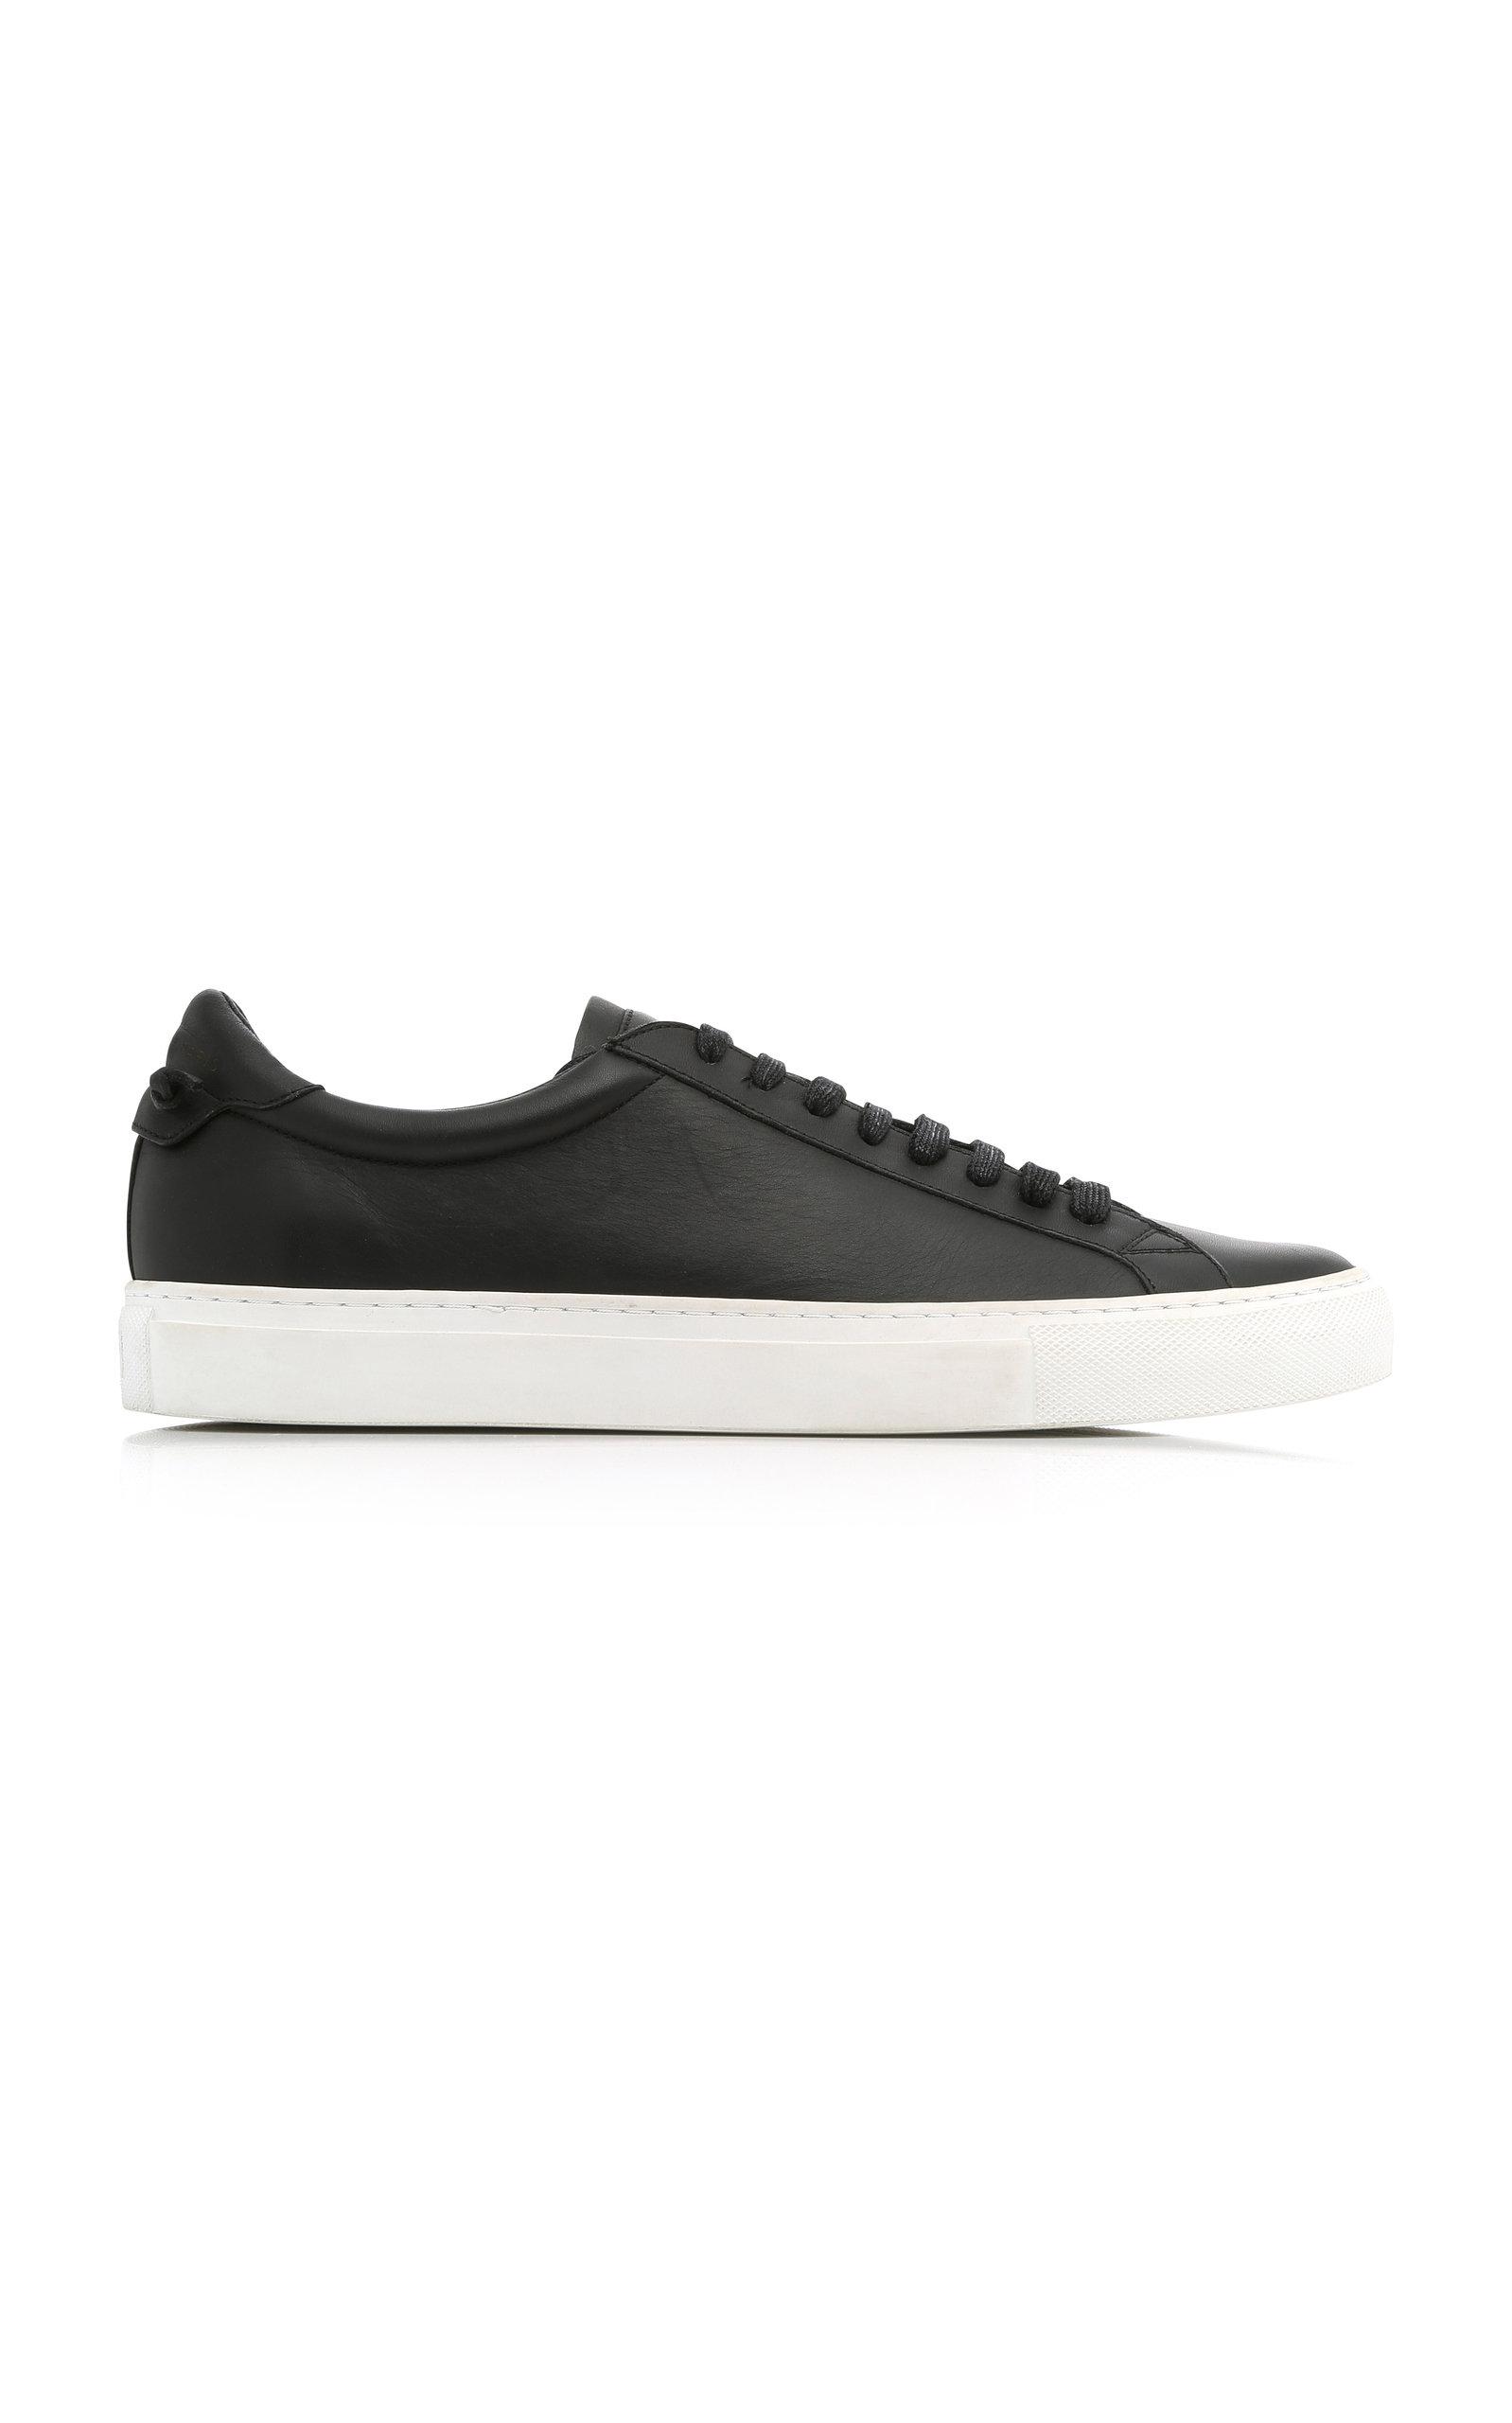 Givenchy Leather Contrast Street Sneakers in Black for Men - Lyst